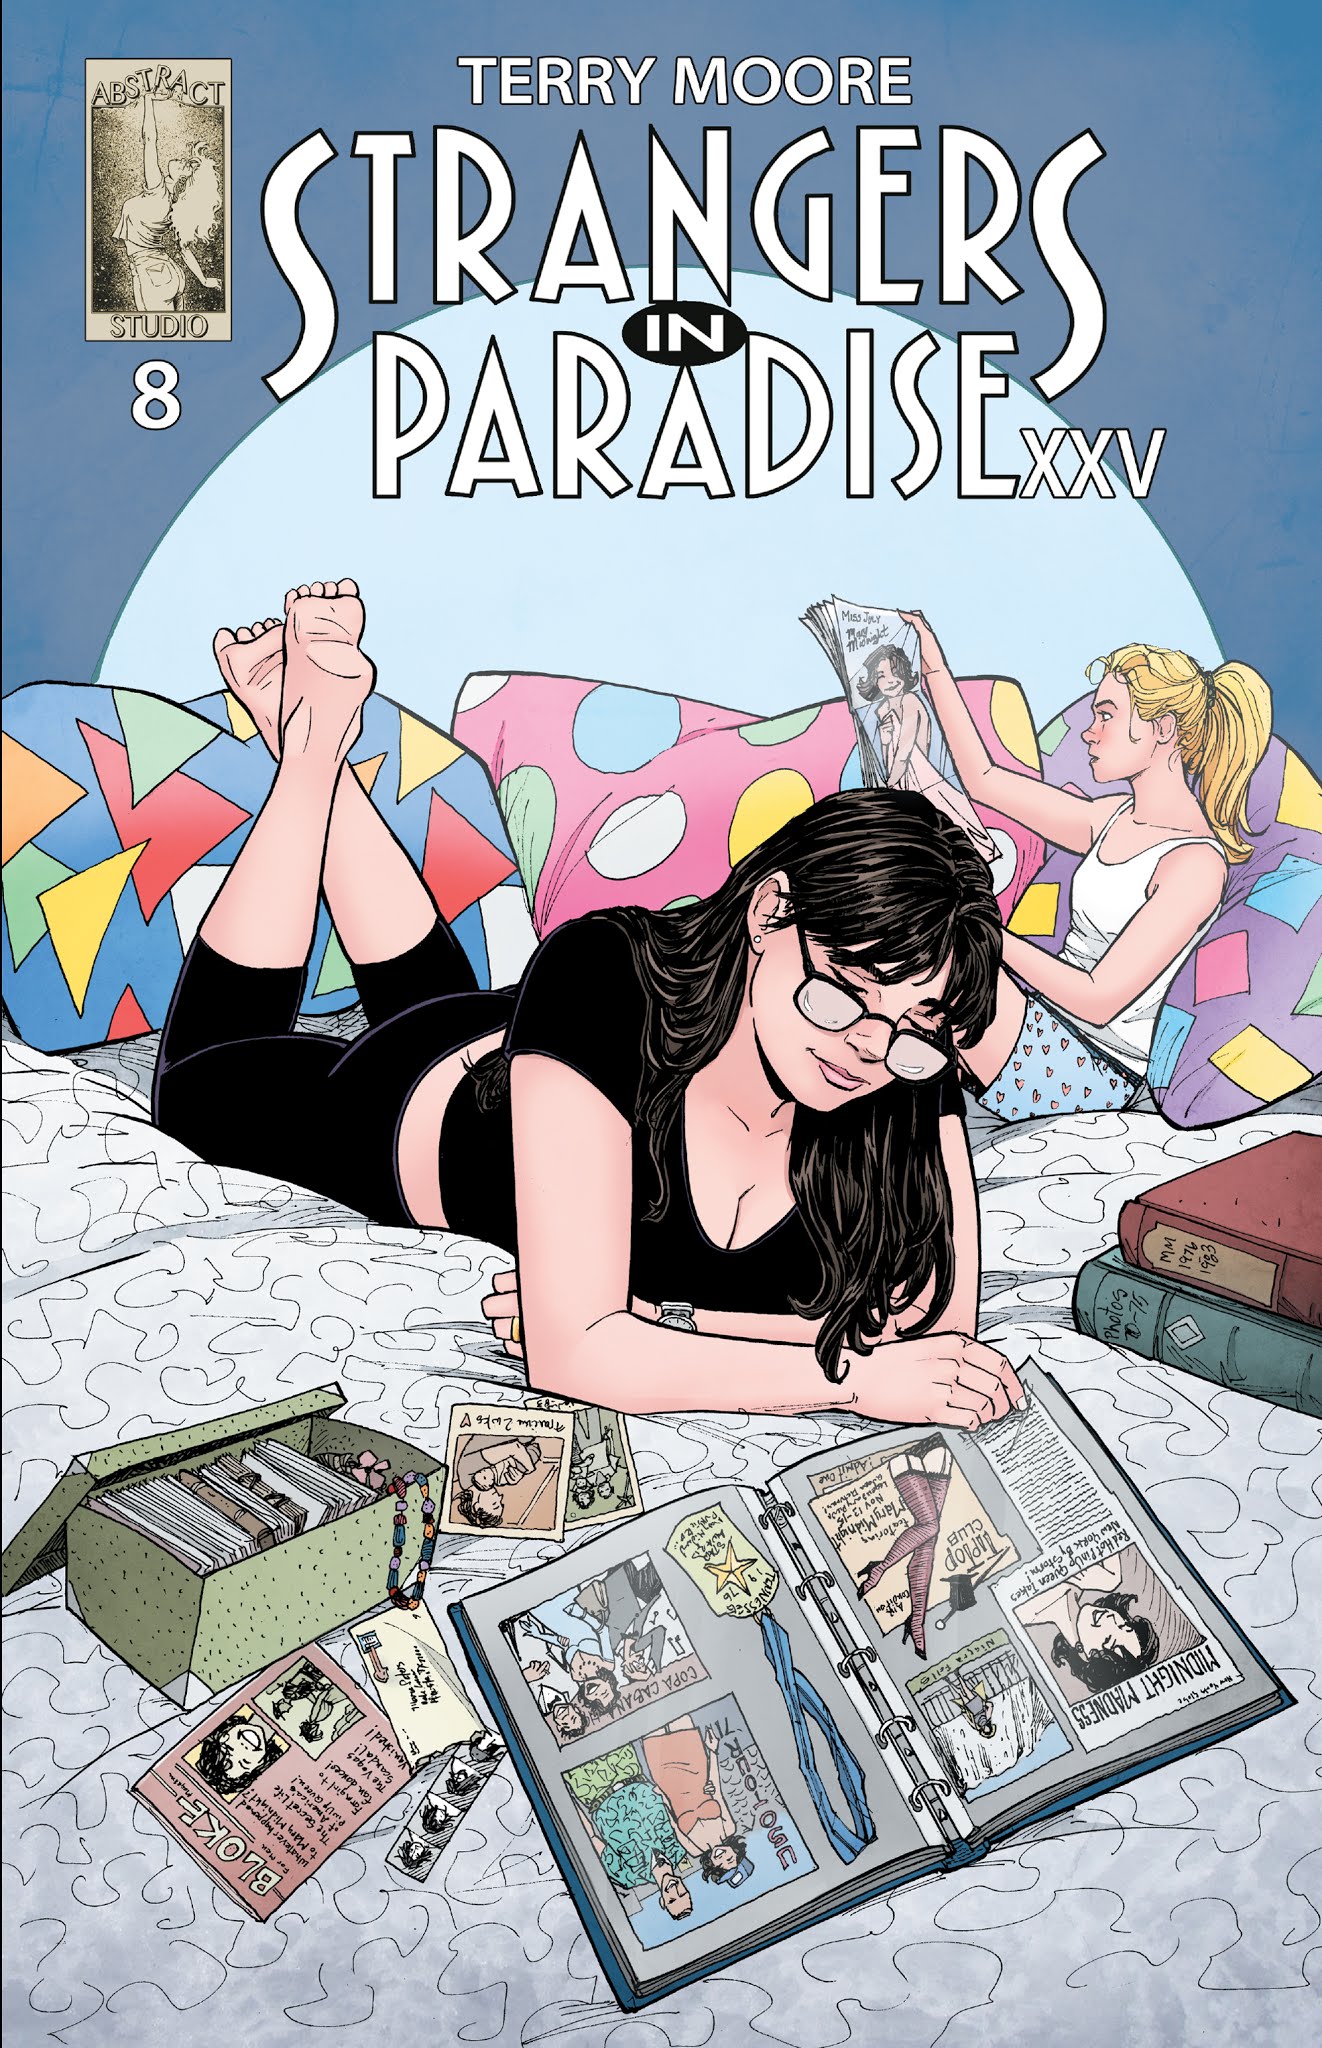 Read online Strangers in Paradise XXV comic -  Issue #8 - 1